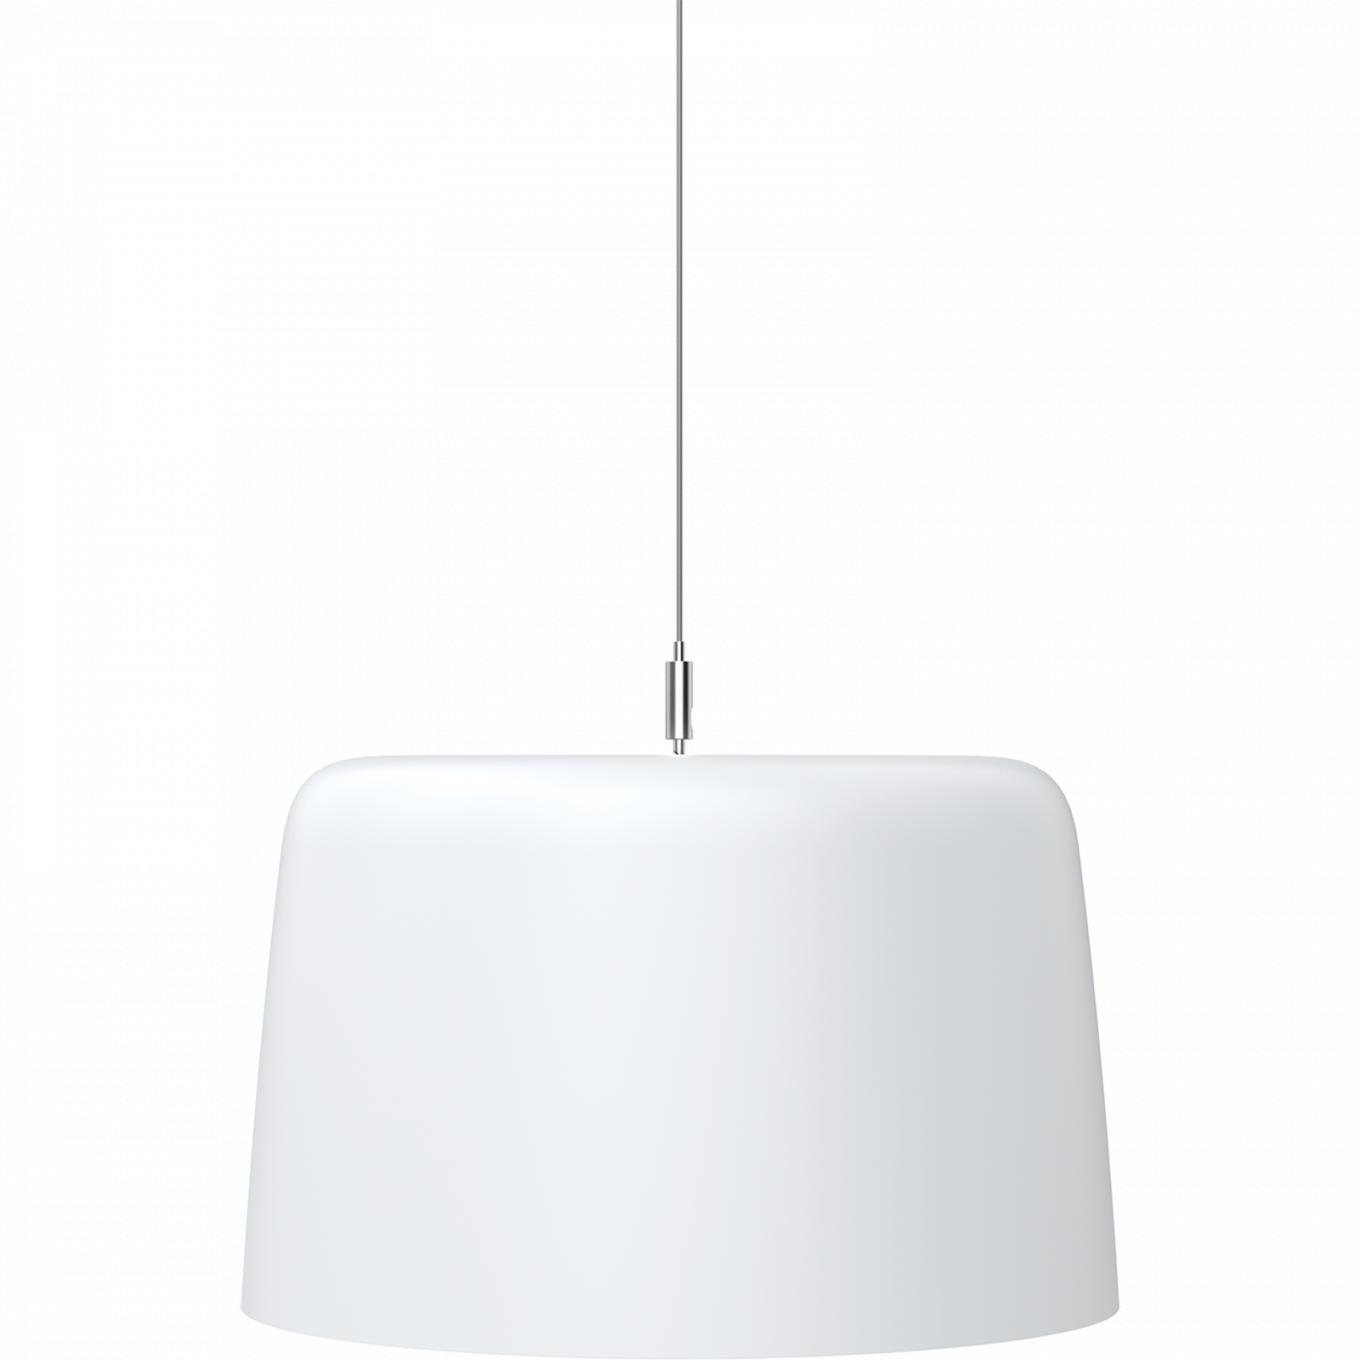 AXIS C1510 Network Pendant Speaker, mounted in the ceiling